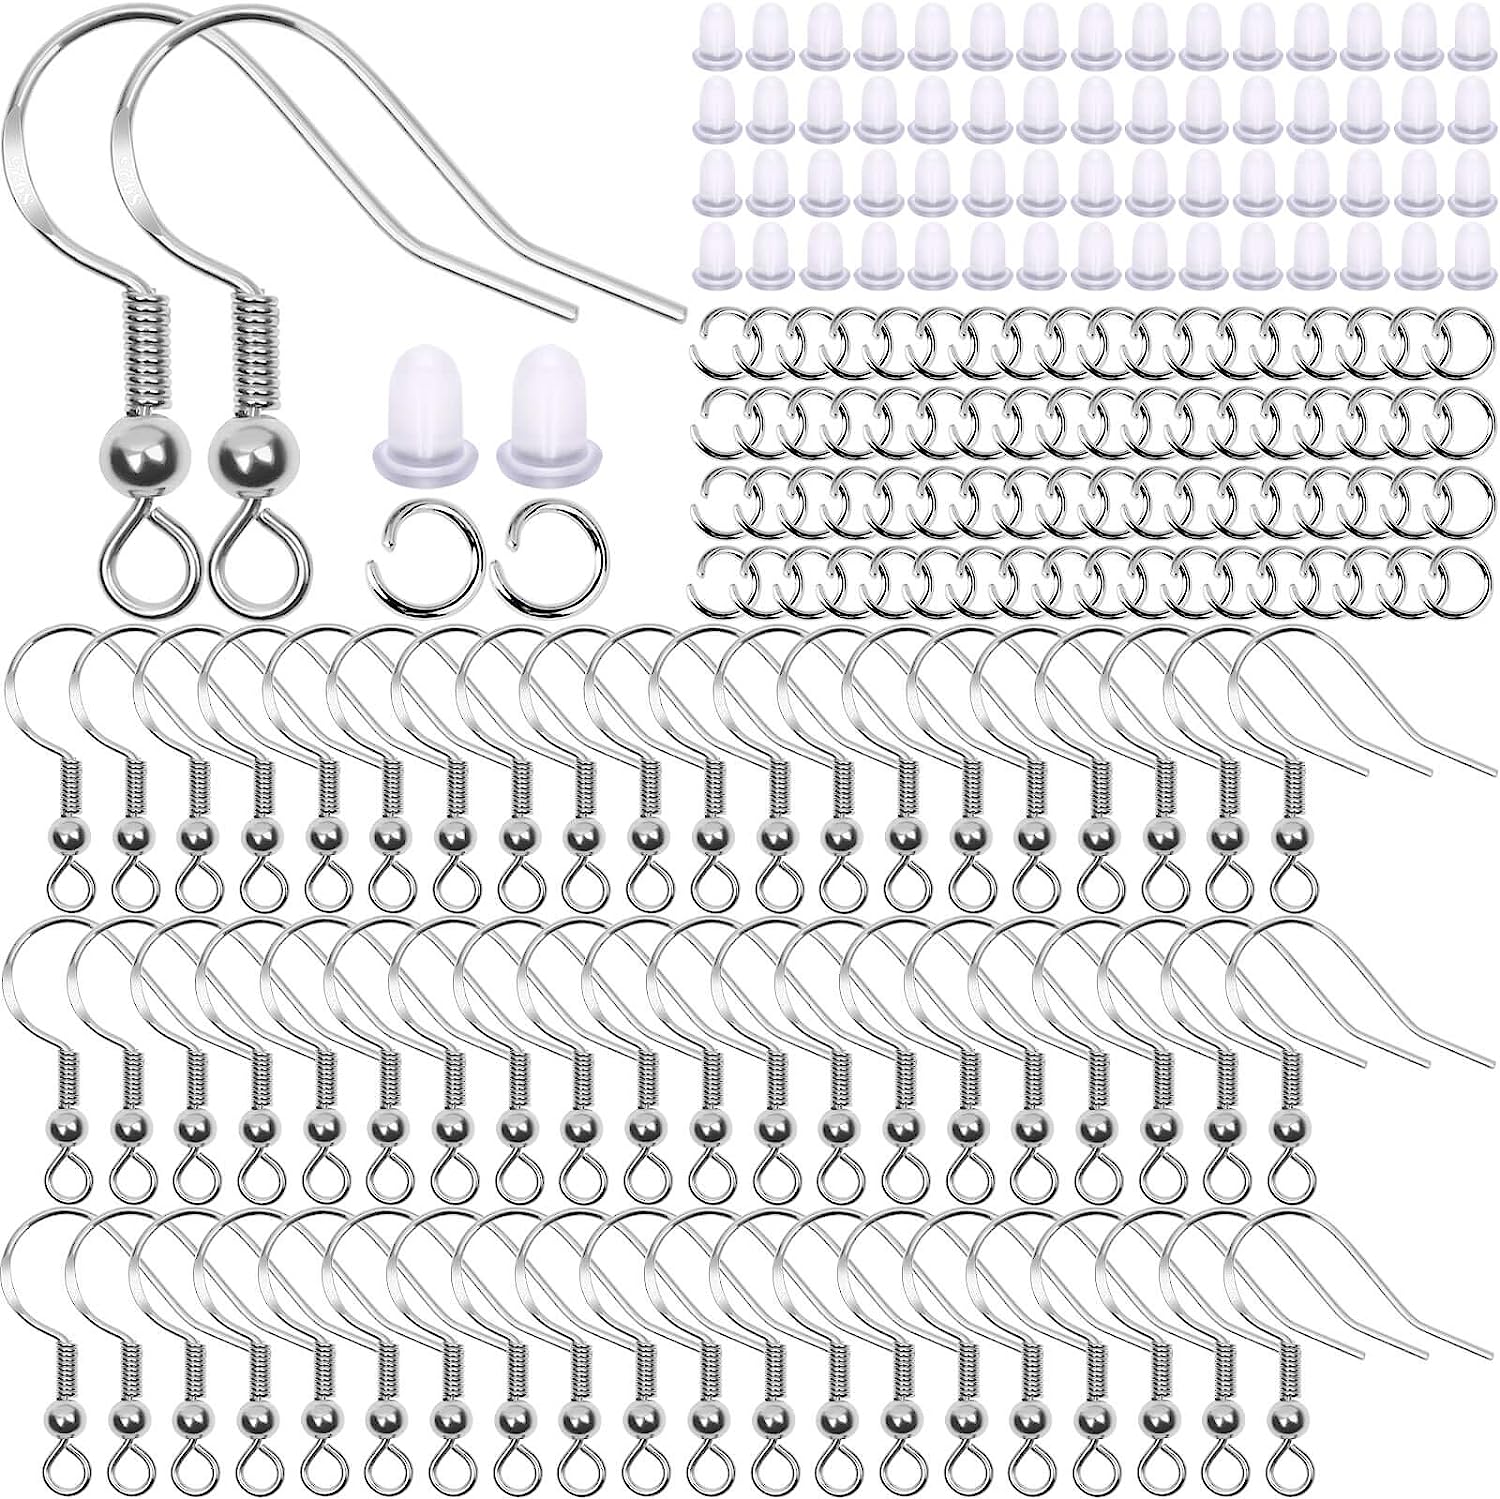 TOAOB 700pcs Earrings Making Kit with Hypoallergenic 925 Sterling